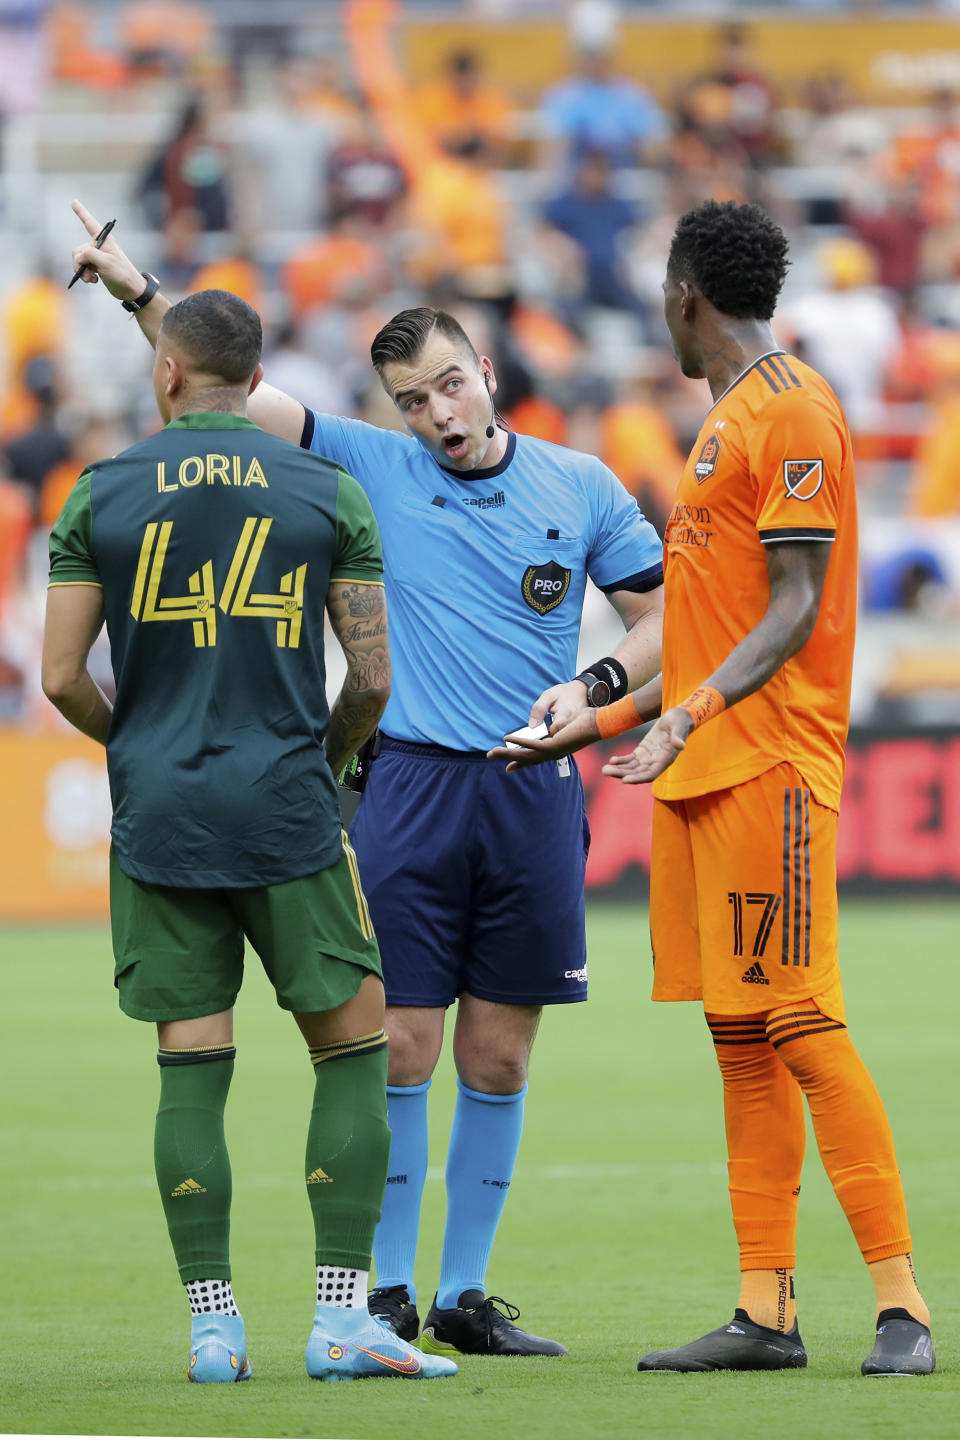 After issuing a red card to Houston Dynamo defender Teenage Hadebe (17), Referee Rosendo Mendoza, center, points off-field telling Hadebe to leave as Portland Timbers midfielder Marvin Loría (44) looks on in during the second half of an MLS soccer match Saturday, April 16, 2022, in Houston. (AP Photo/Michael Wyke)